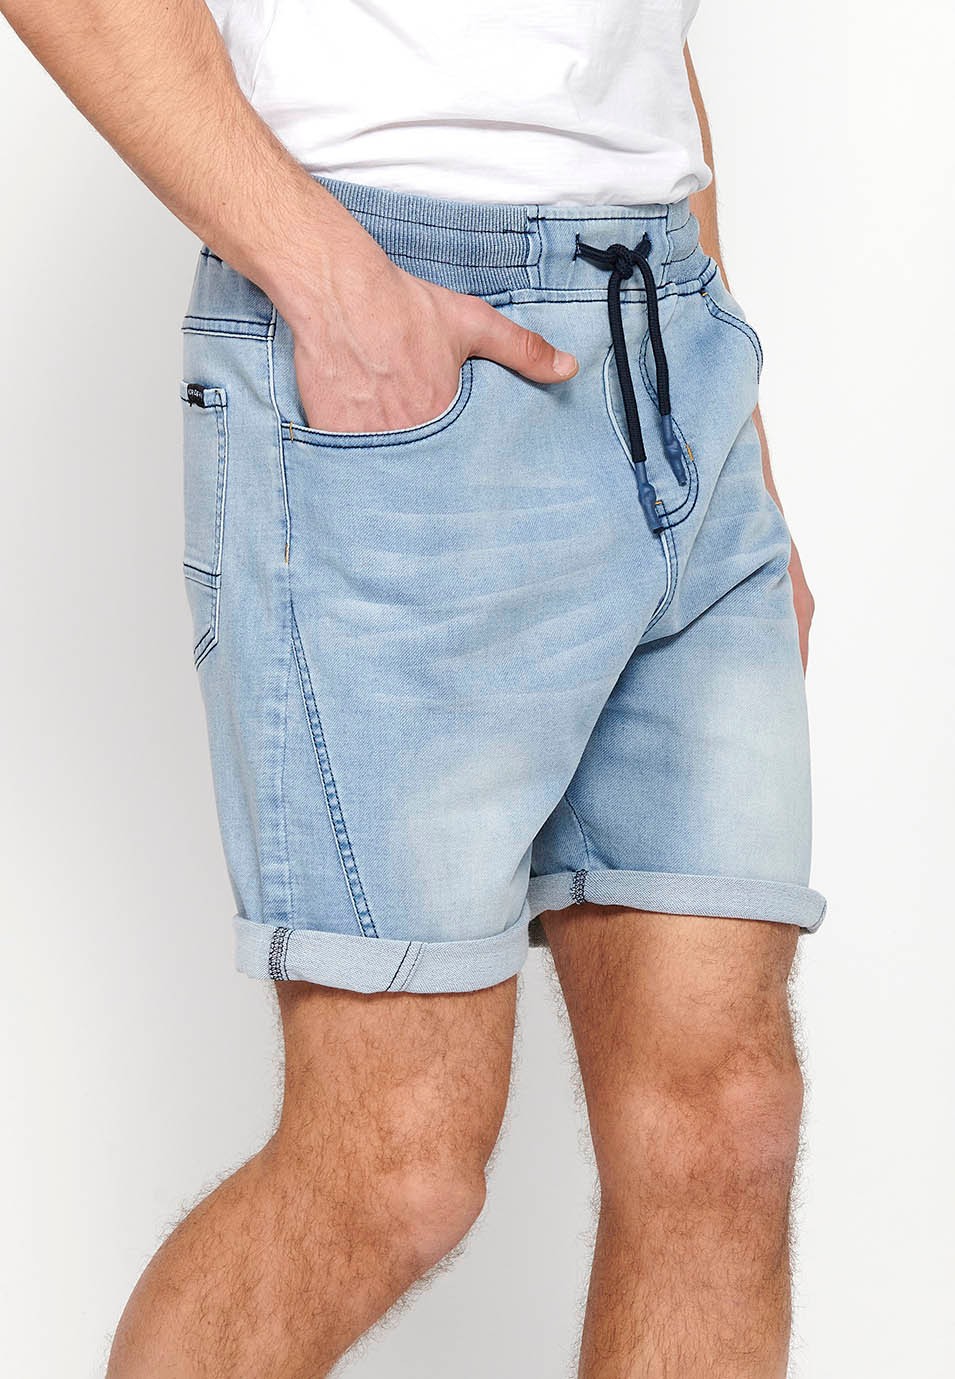 Blue Denim Jogger Shorts with Turn-Up Finish with Adjustable Waist with Rubber and Drawstring for Men